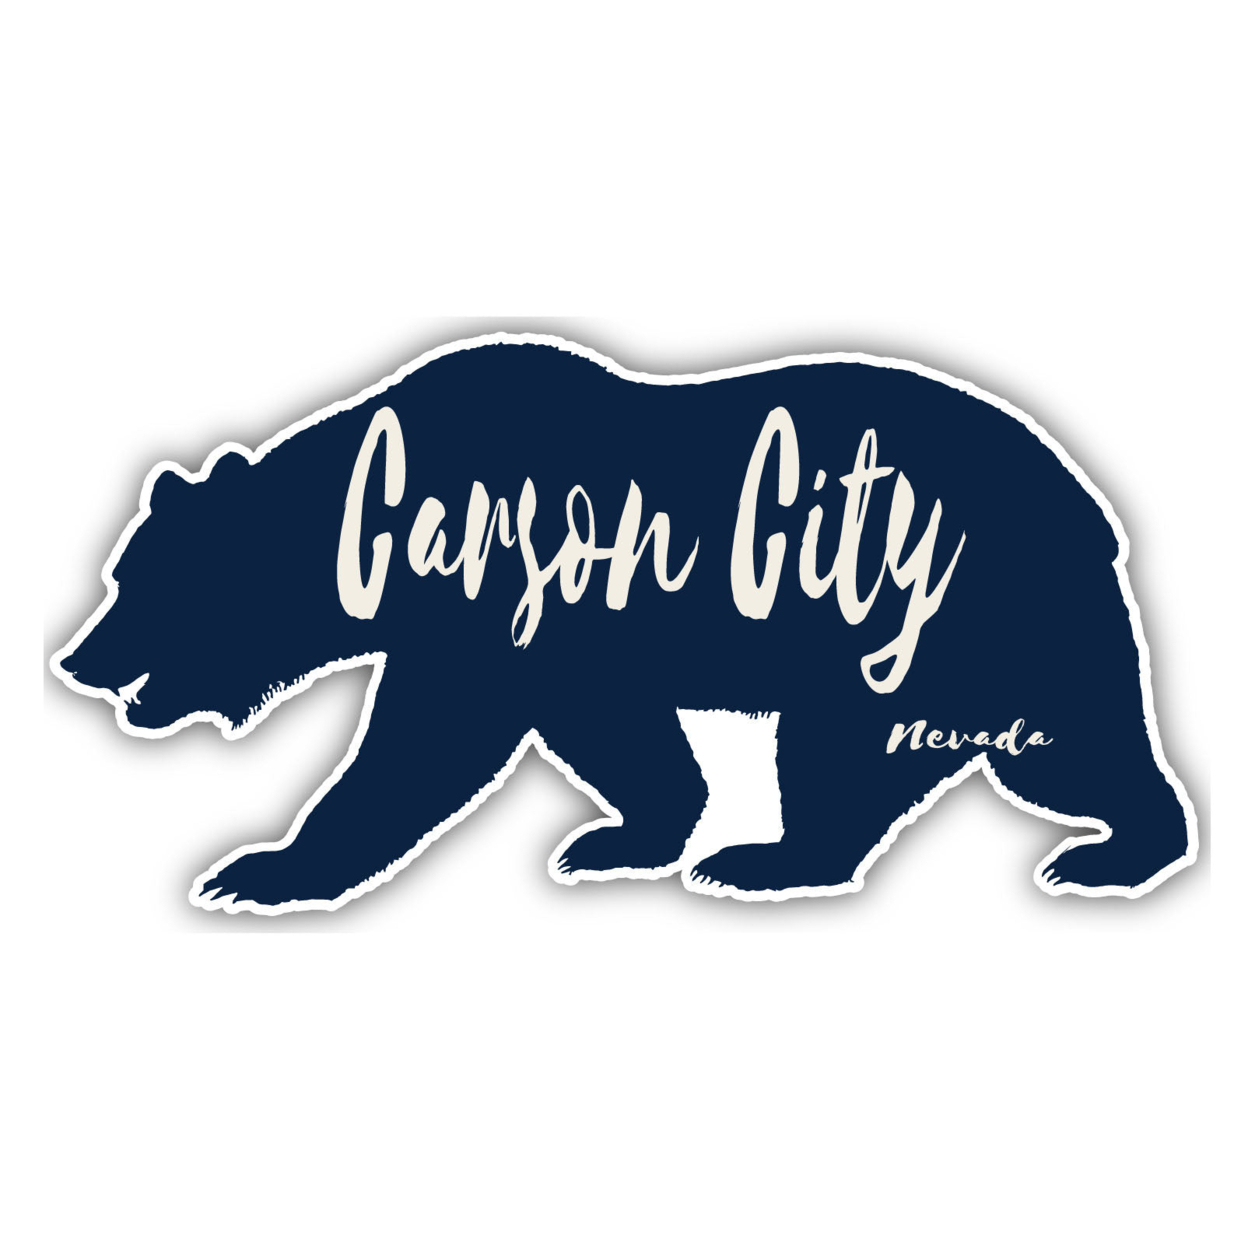 Carson City Nevada Souvenir Decorative Stickers (Choose Theme And Size) - 4-Pack, 10-Inch, Bear